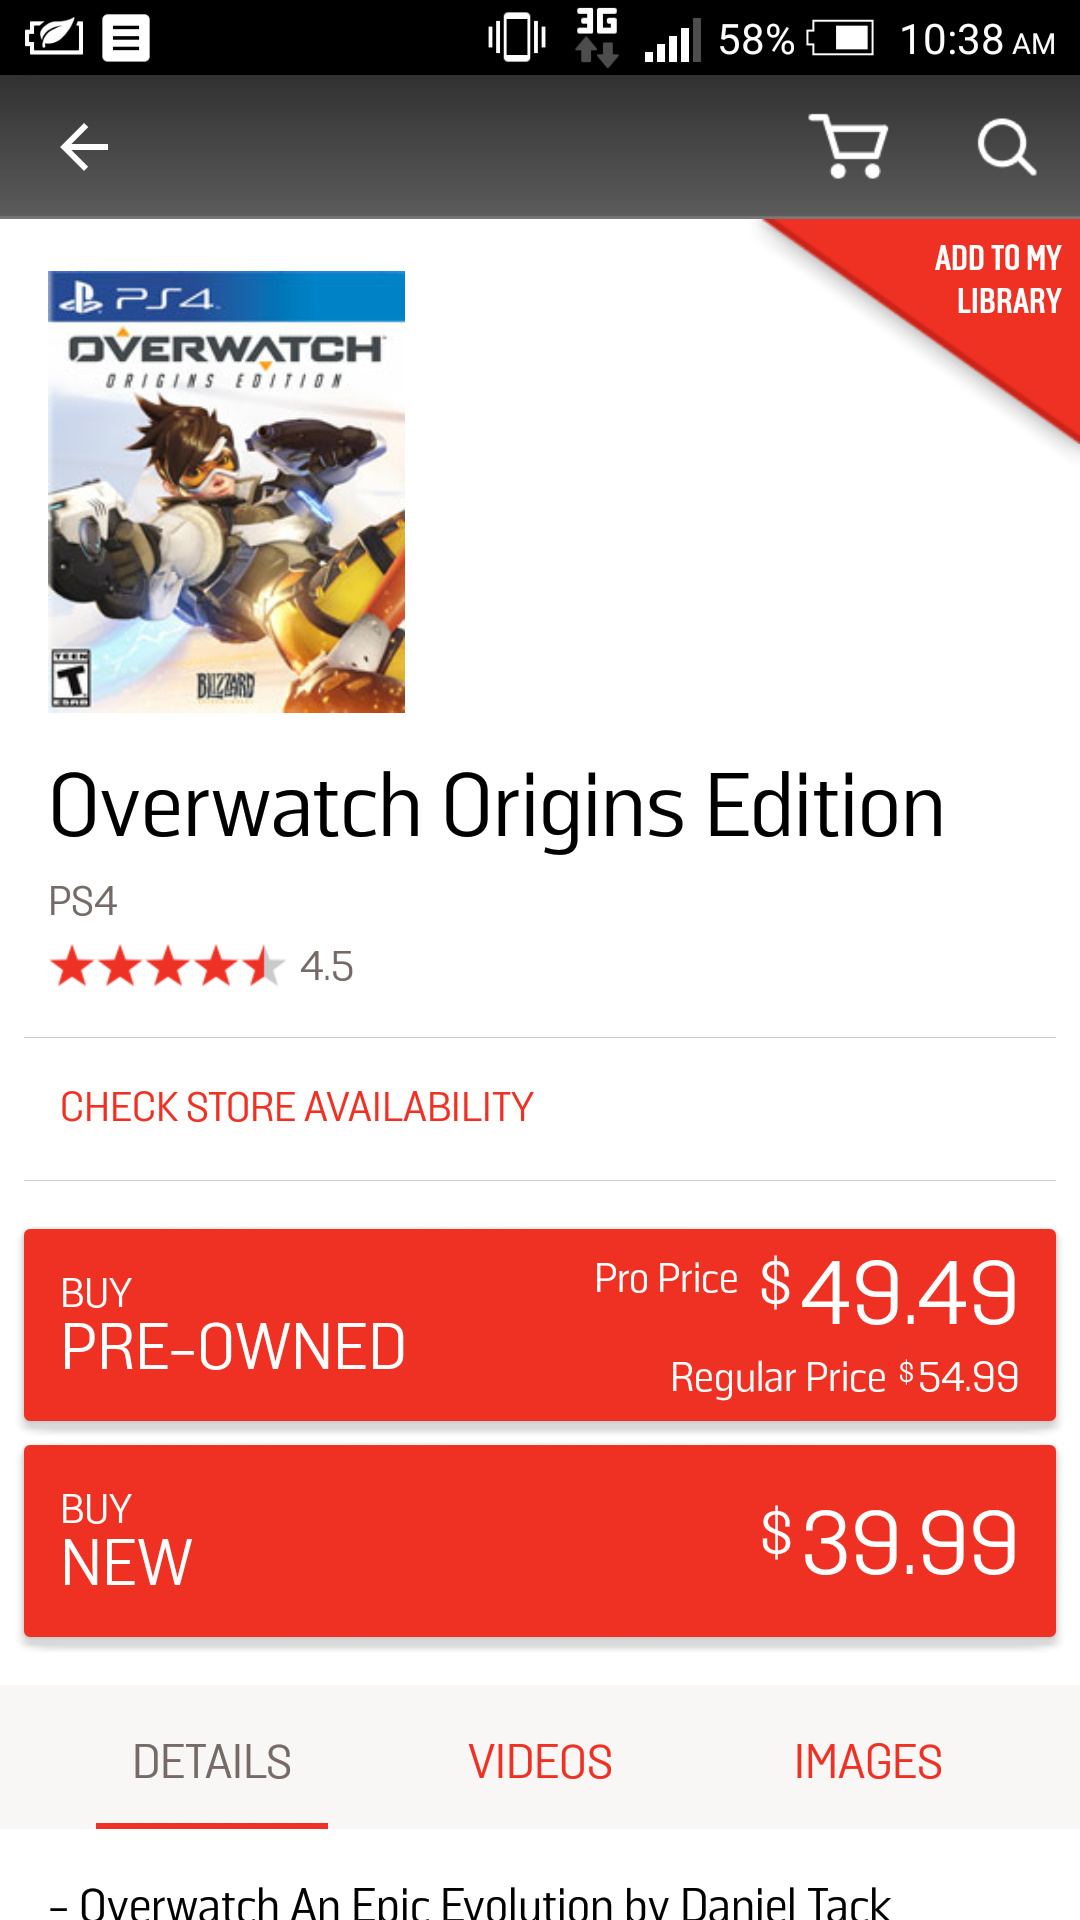 Really Gamestop?? More for Pre-owned? - meme